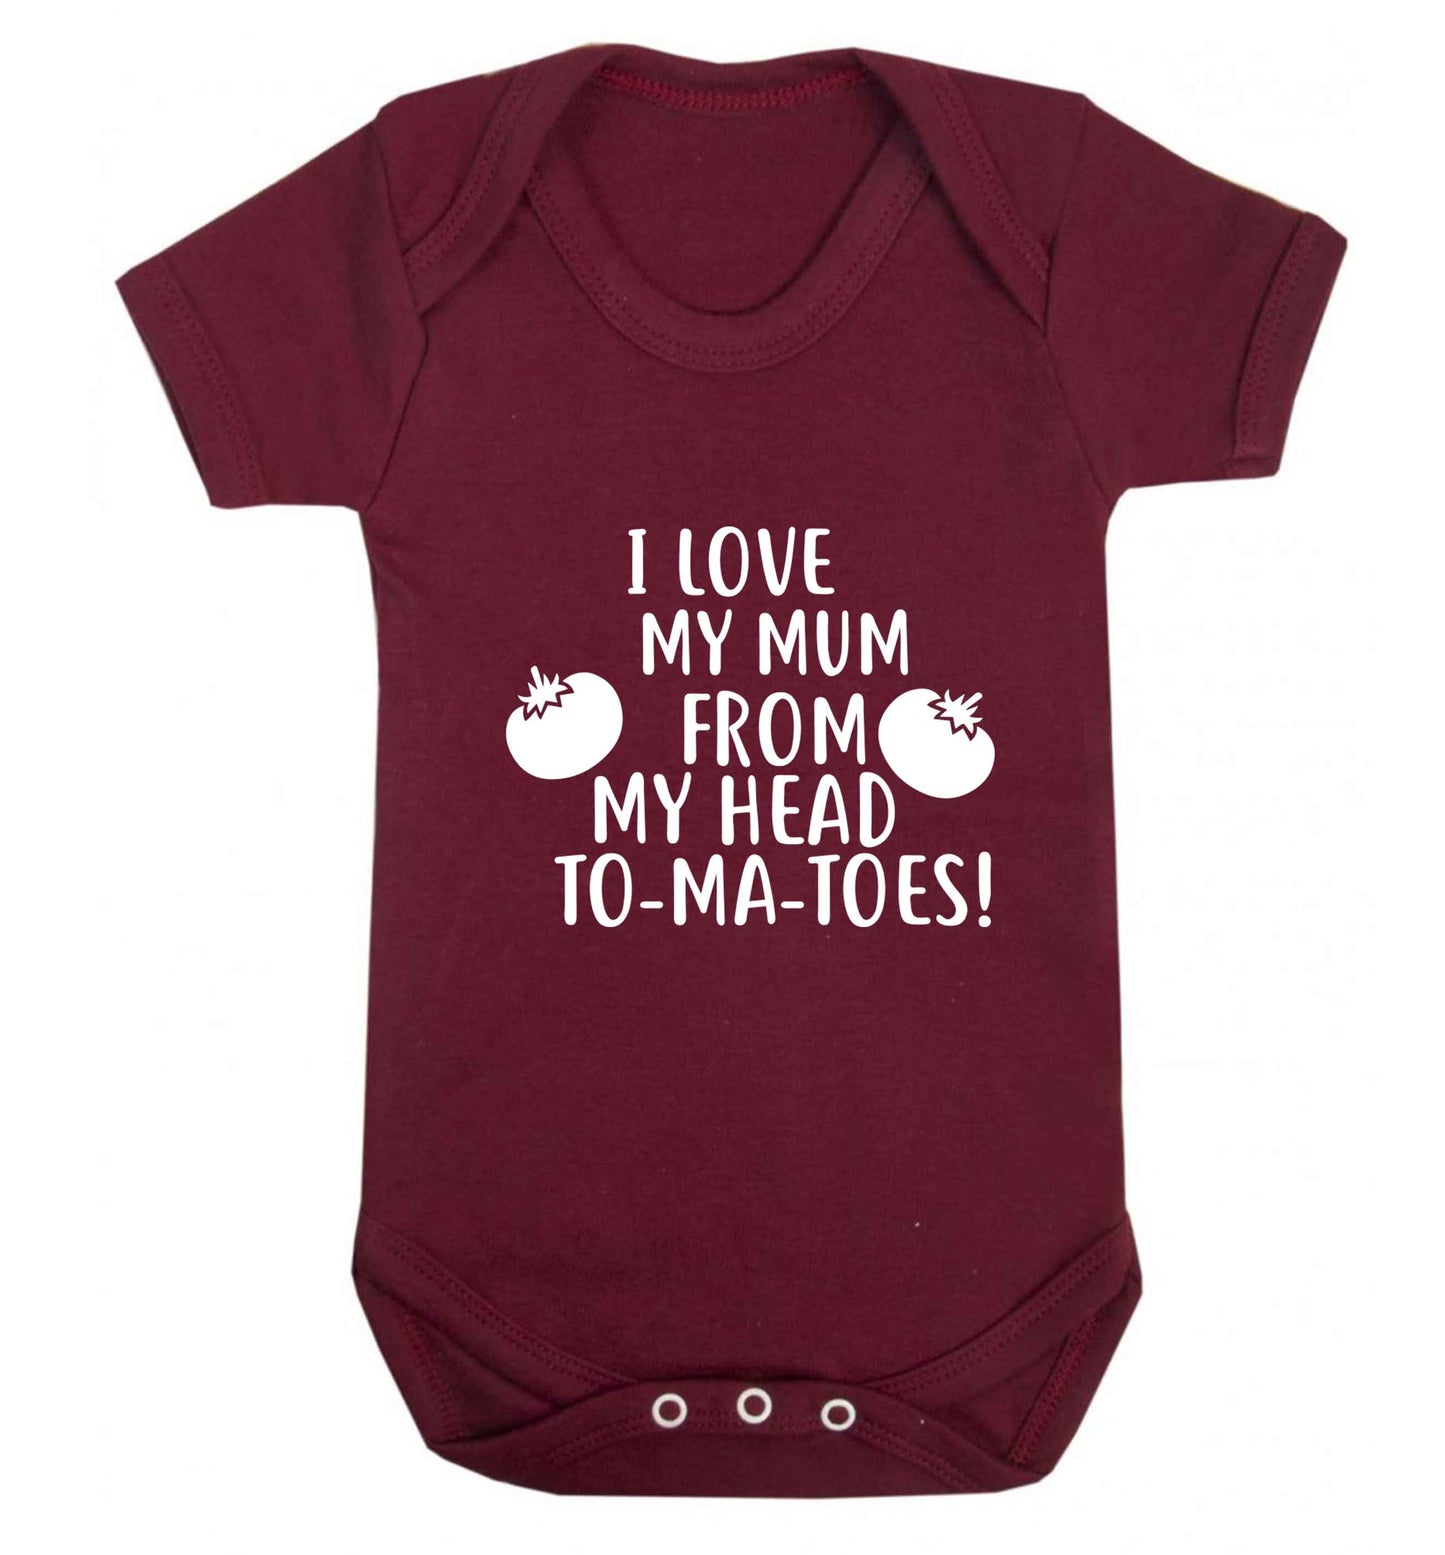 I love my mum from my head to-my-toes! baby vest maroon 18-24 months